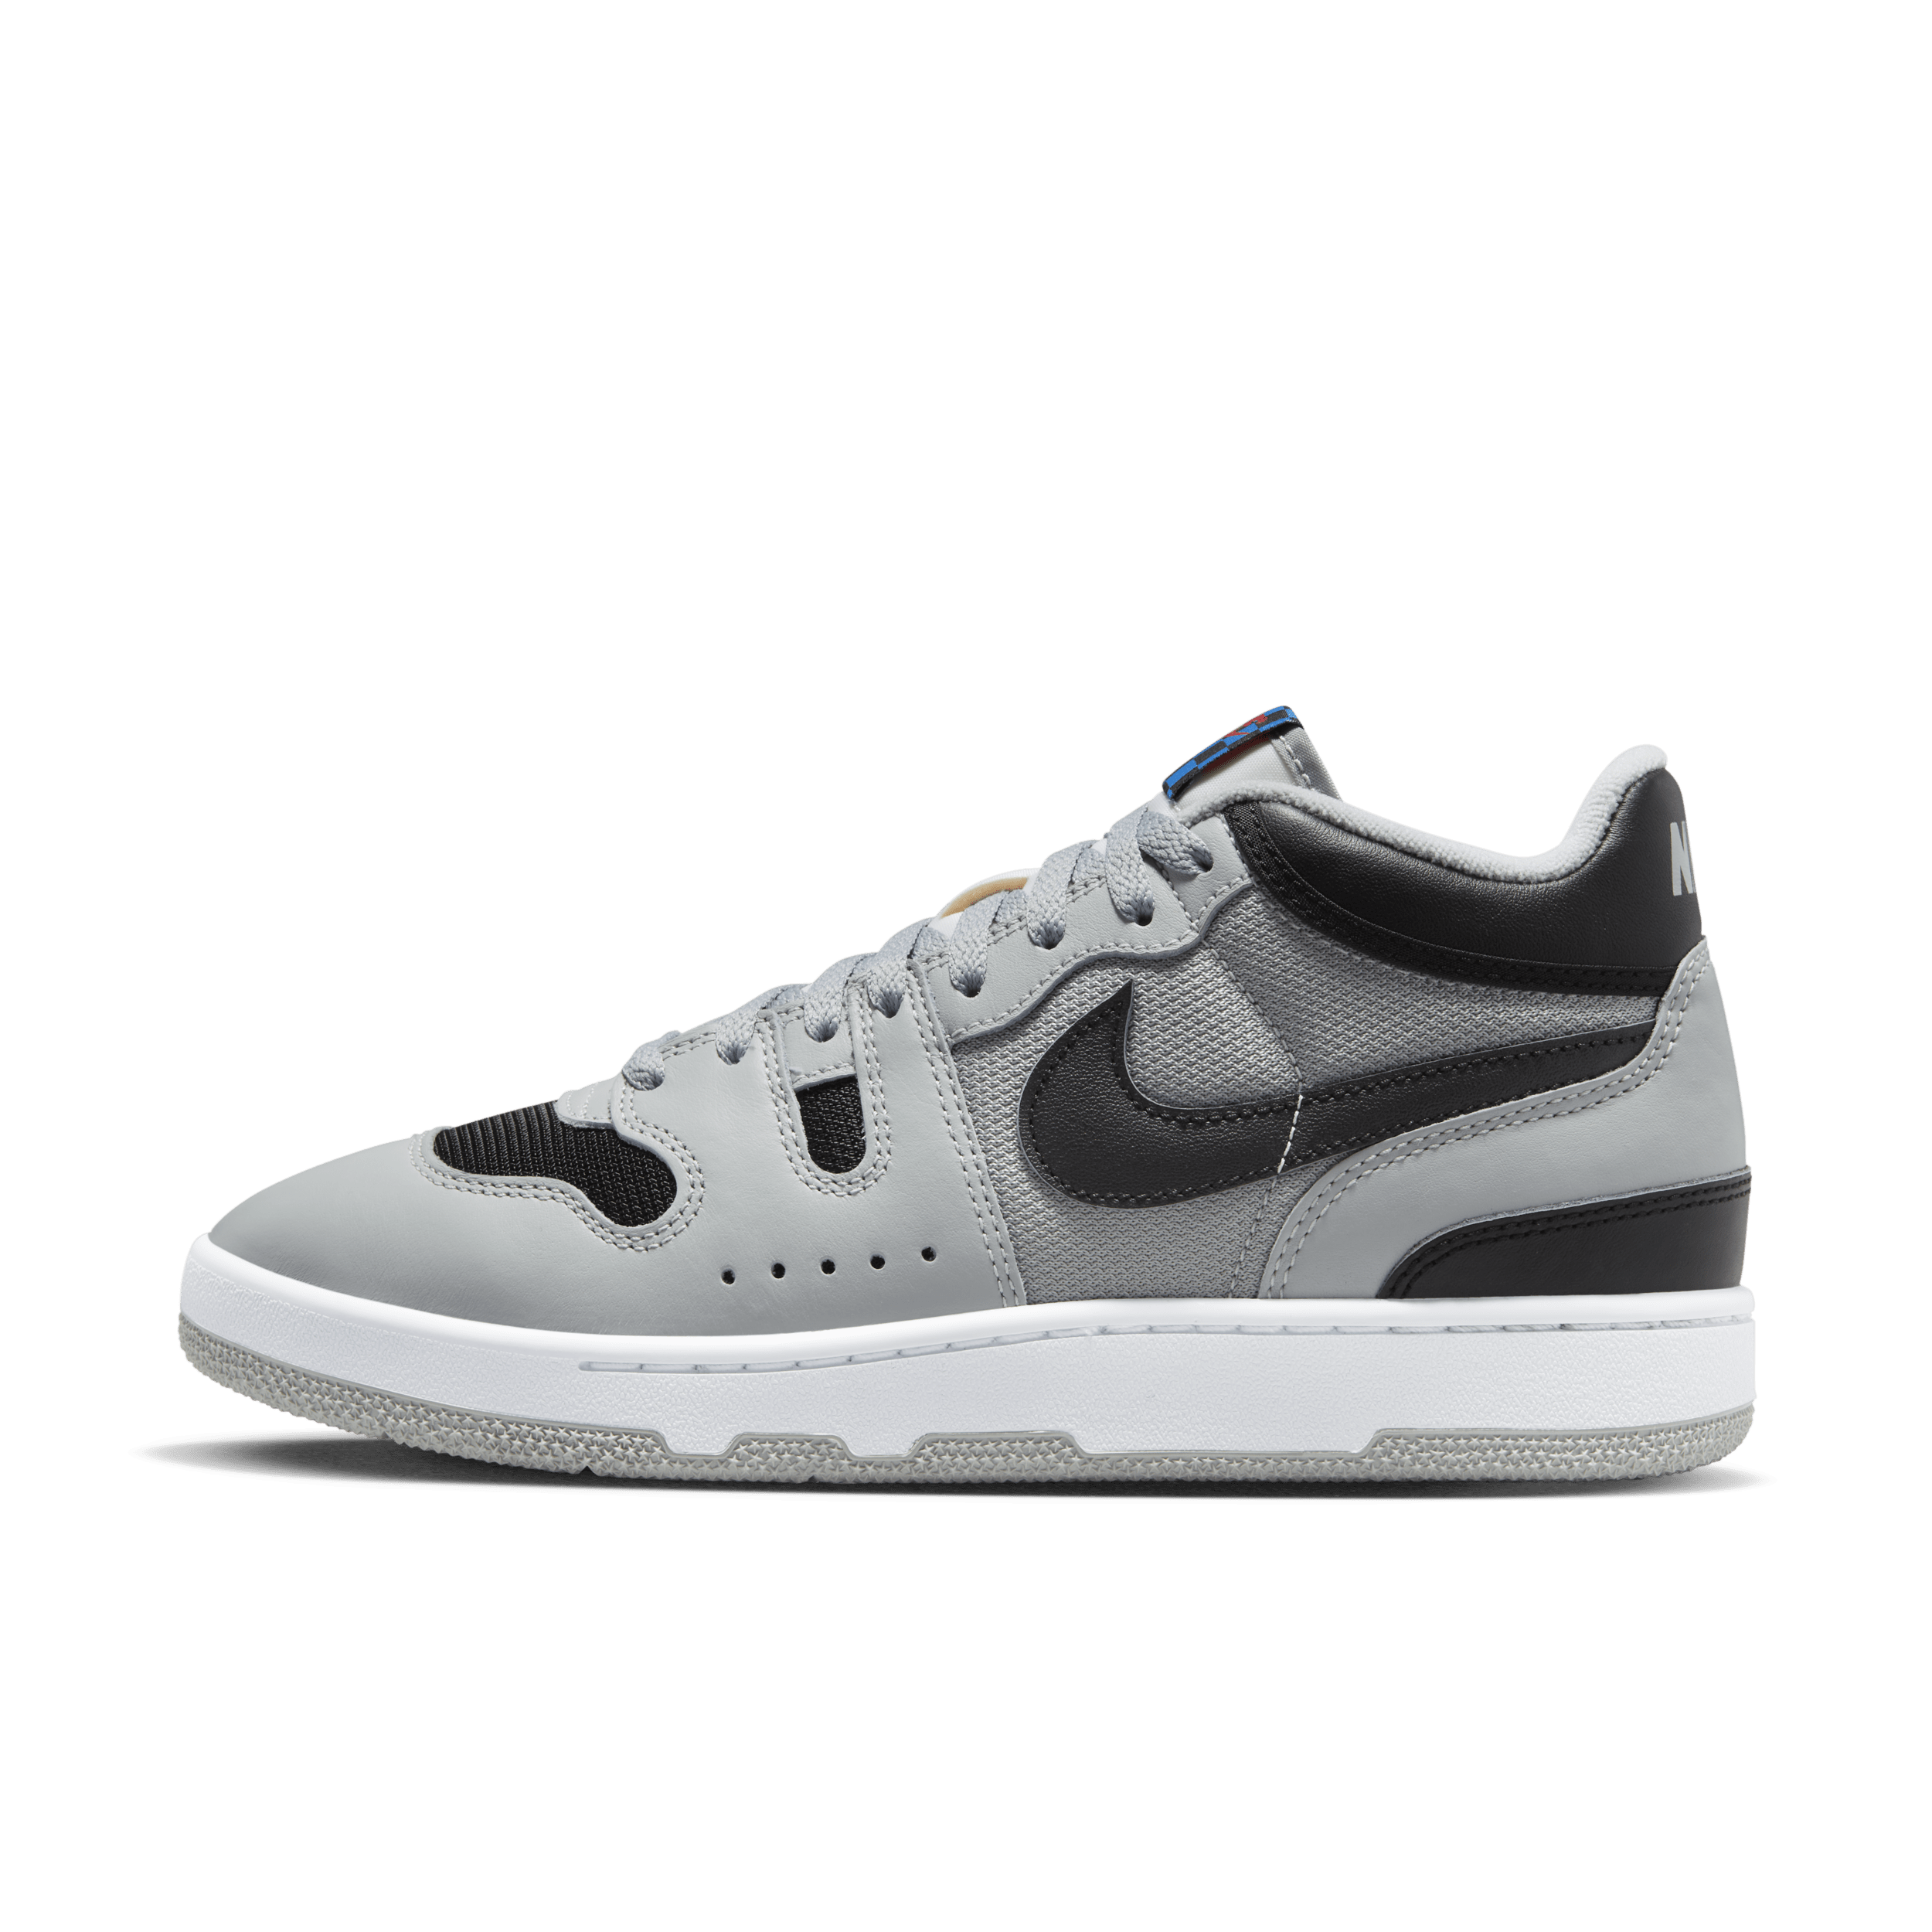 Chaussure Nike Attack pour homme - Gris